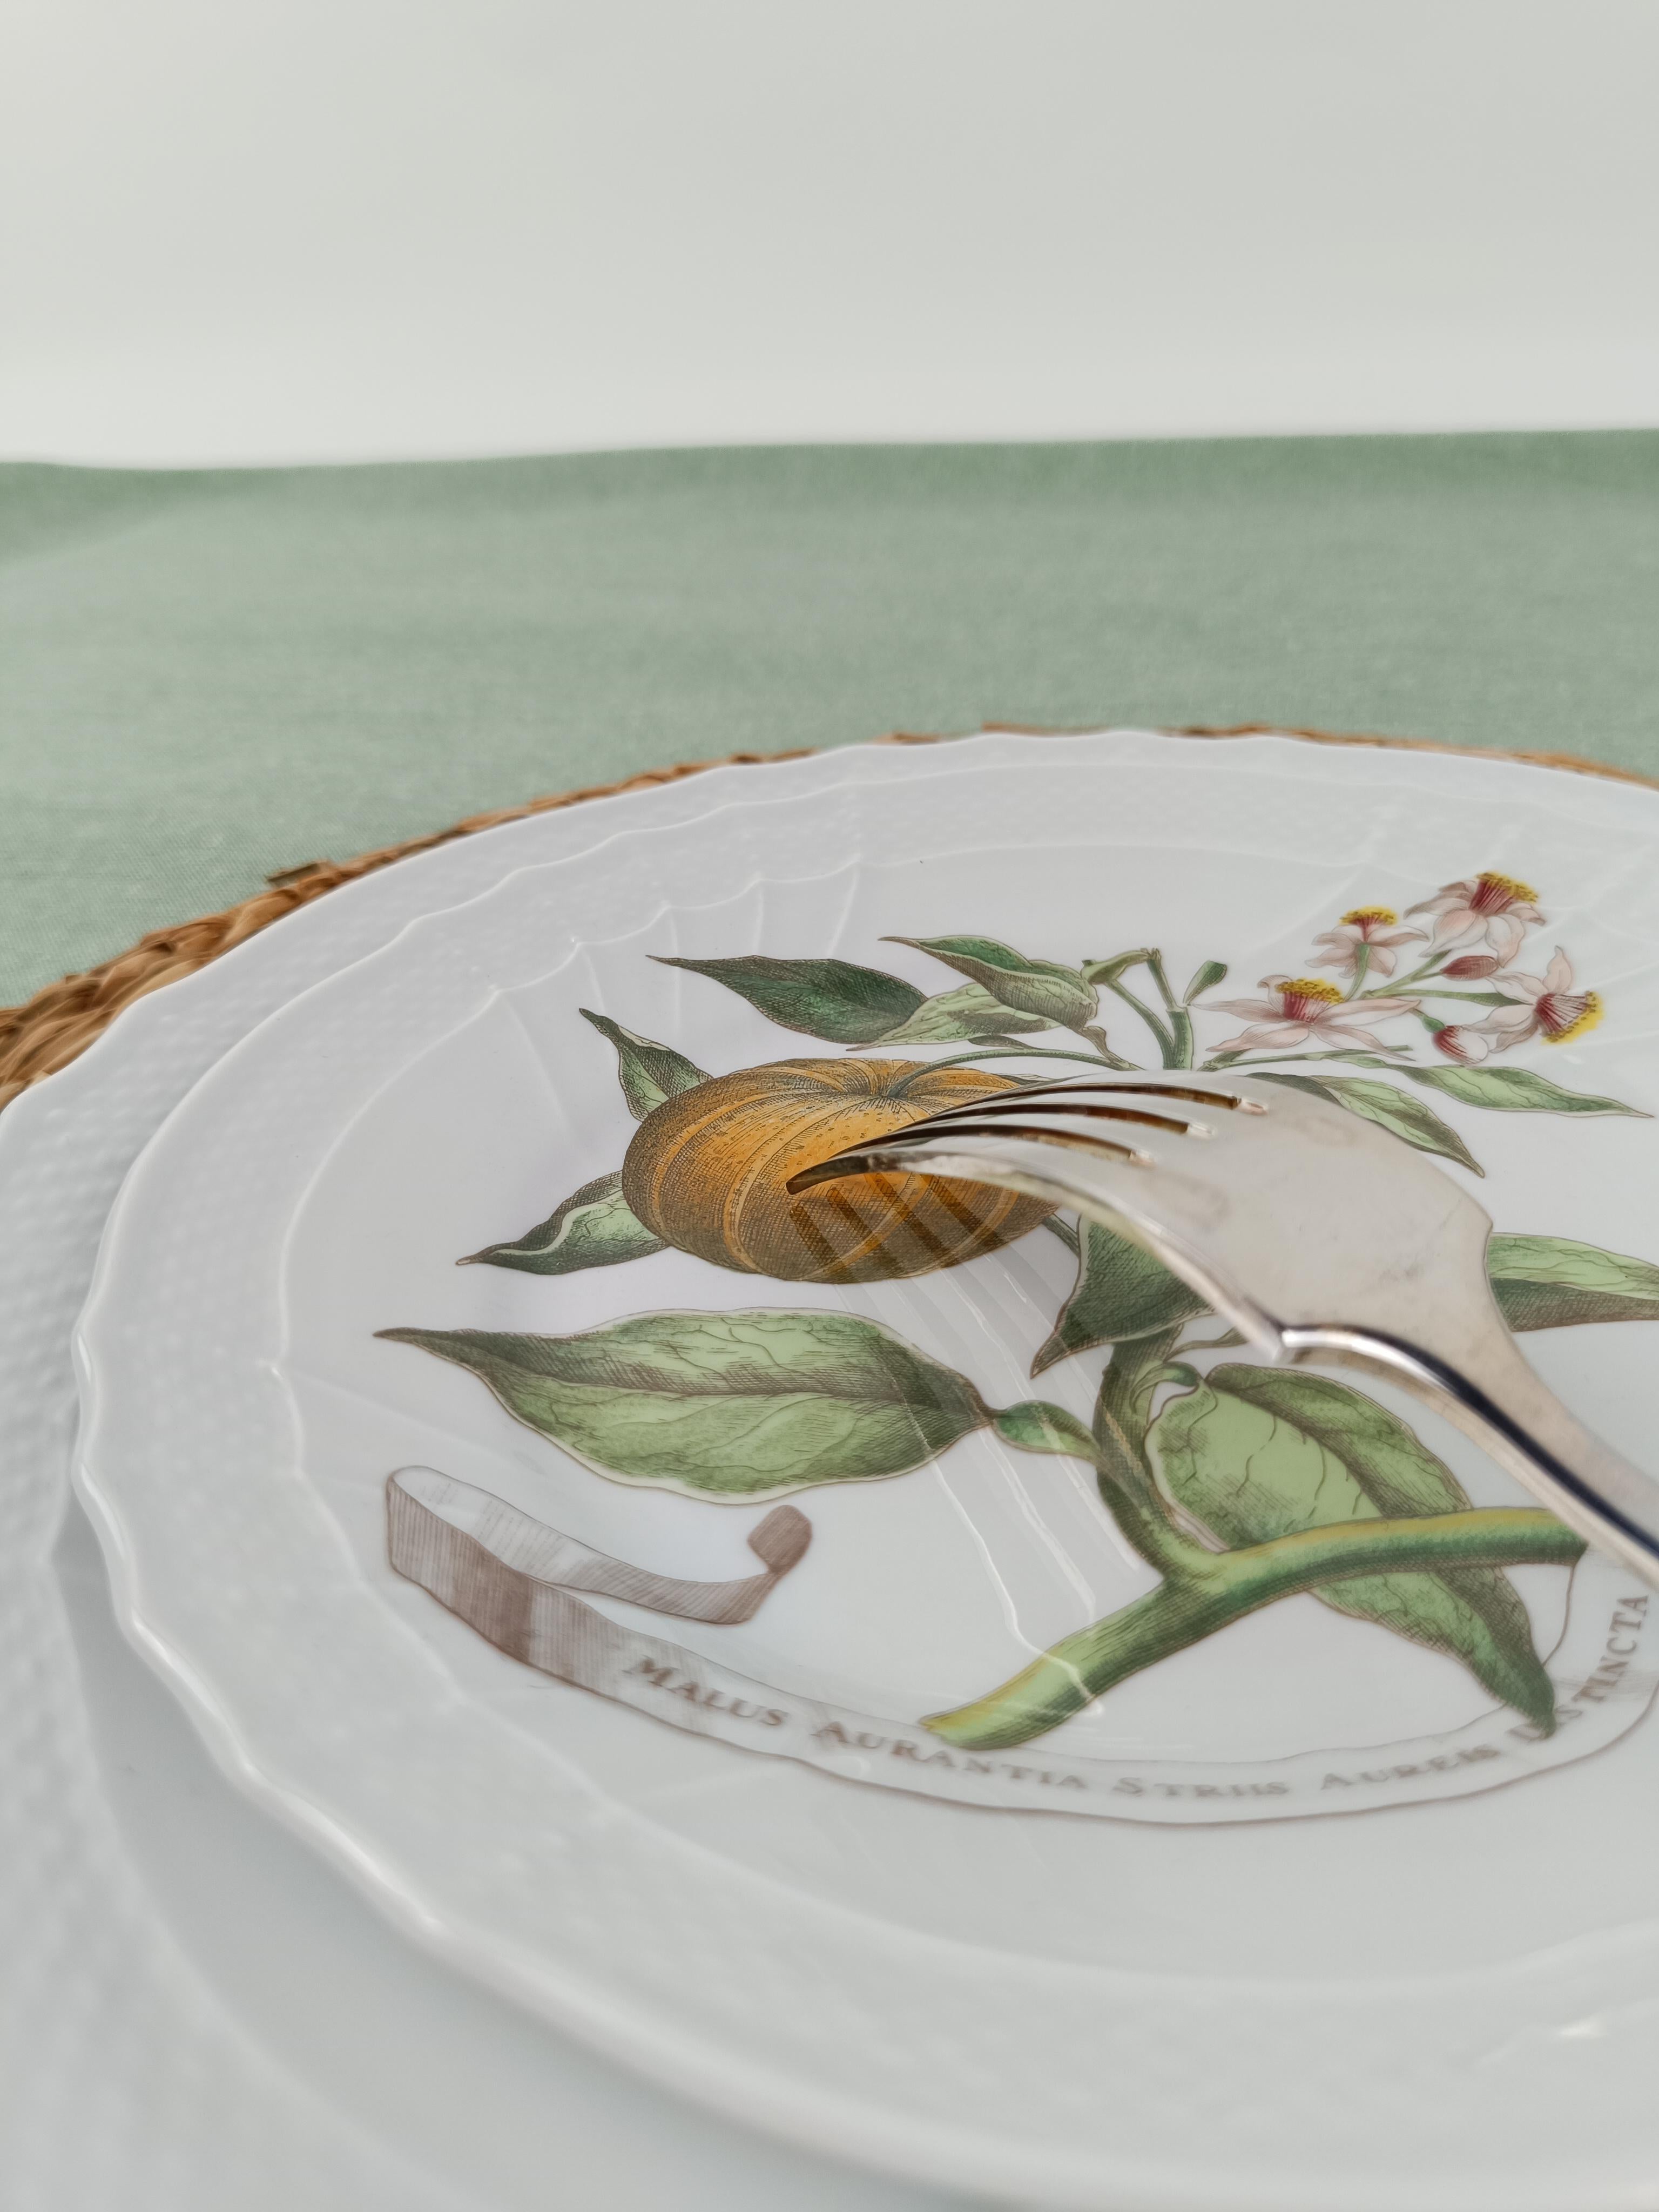 Richard Ginori China Dinner Service with a botanical print by Munting Abraham For Sale 2